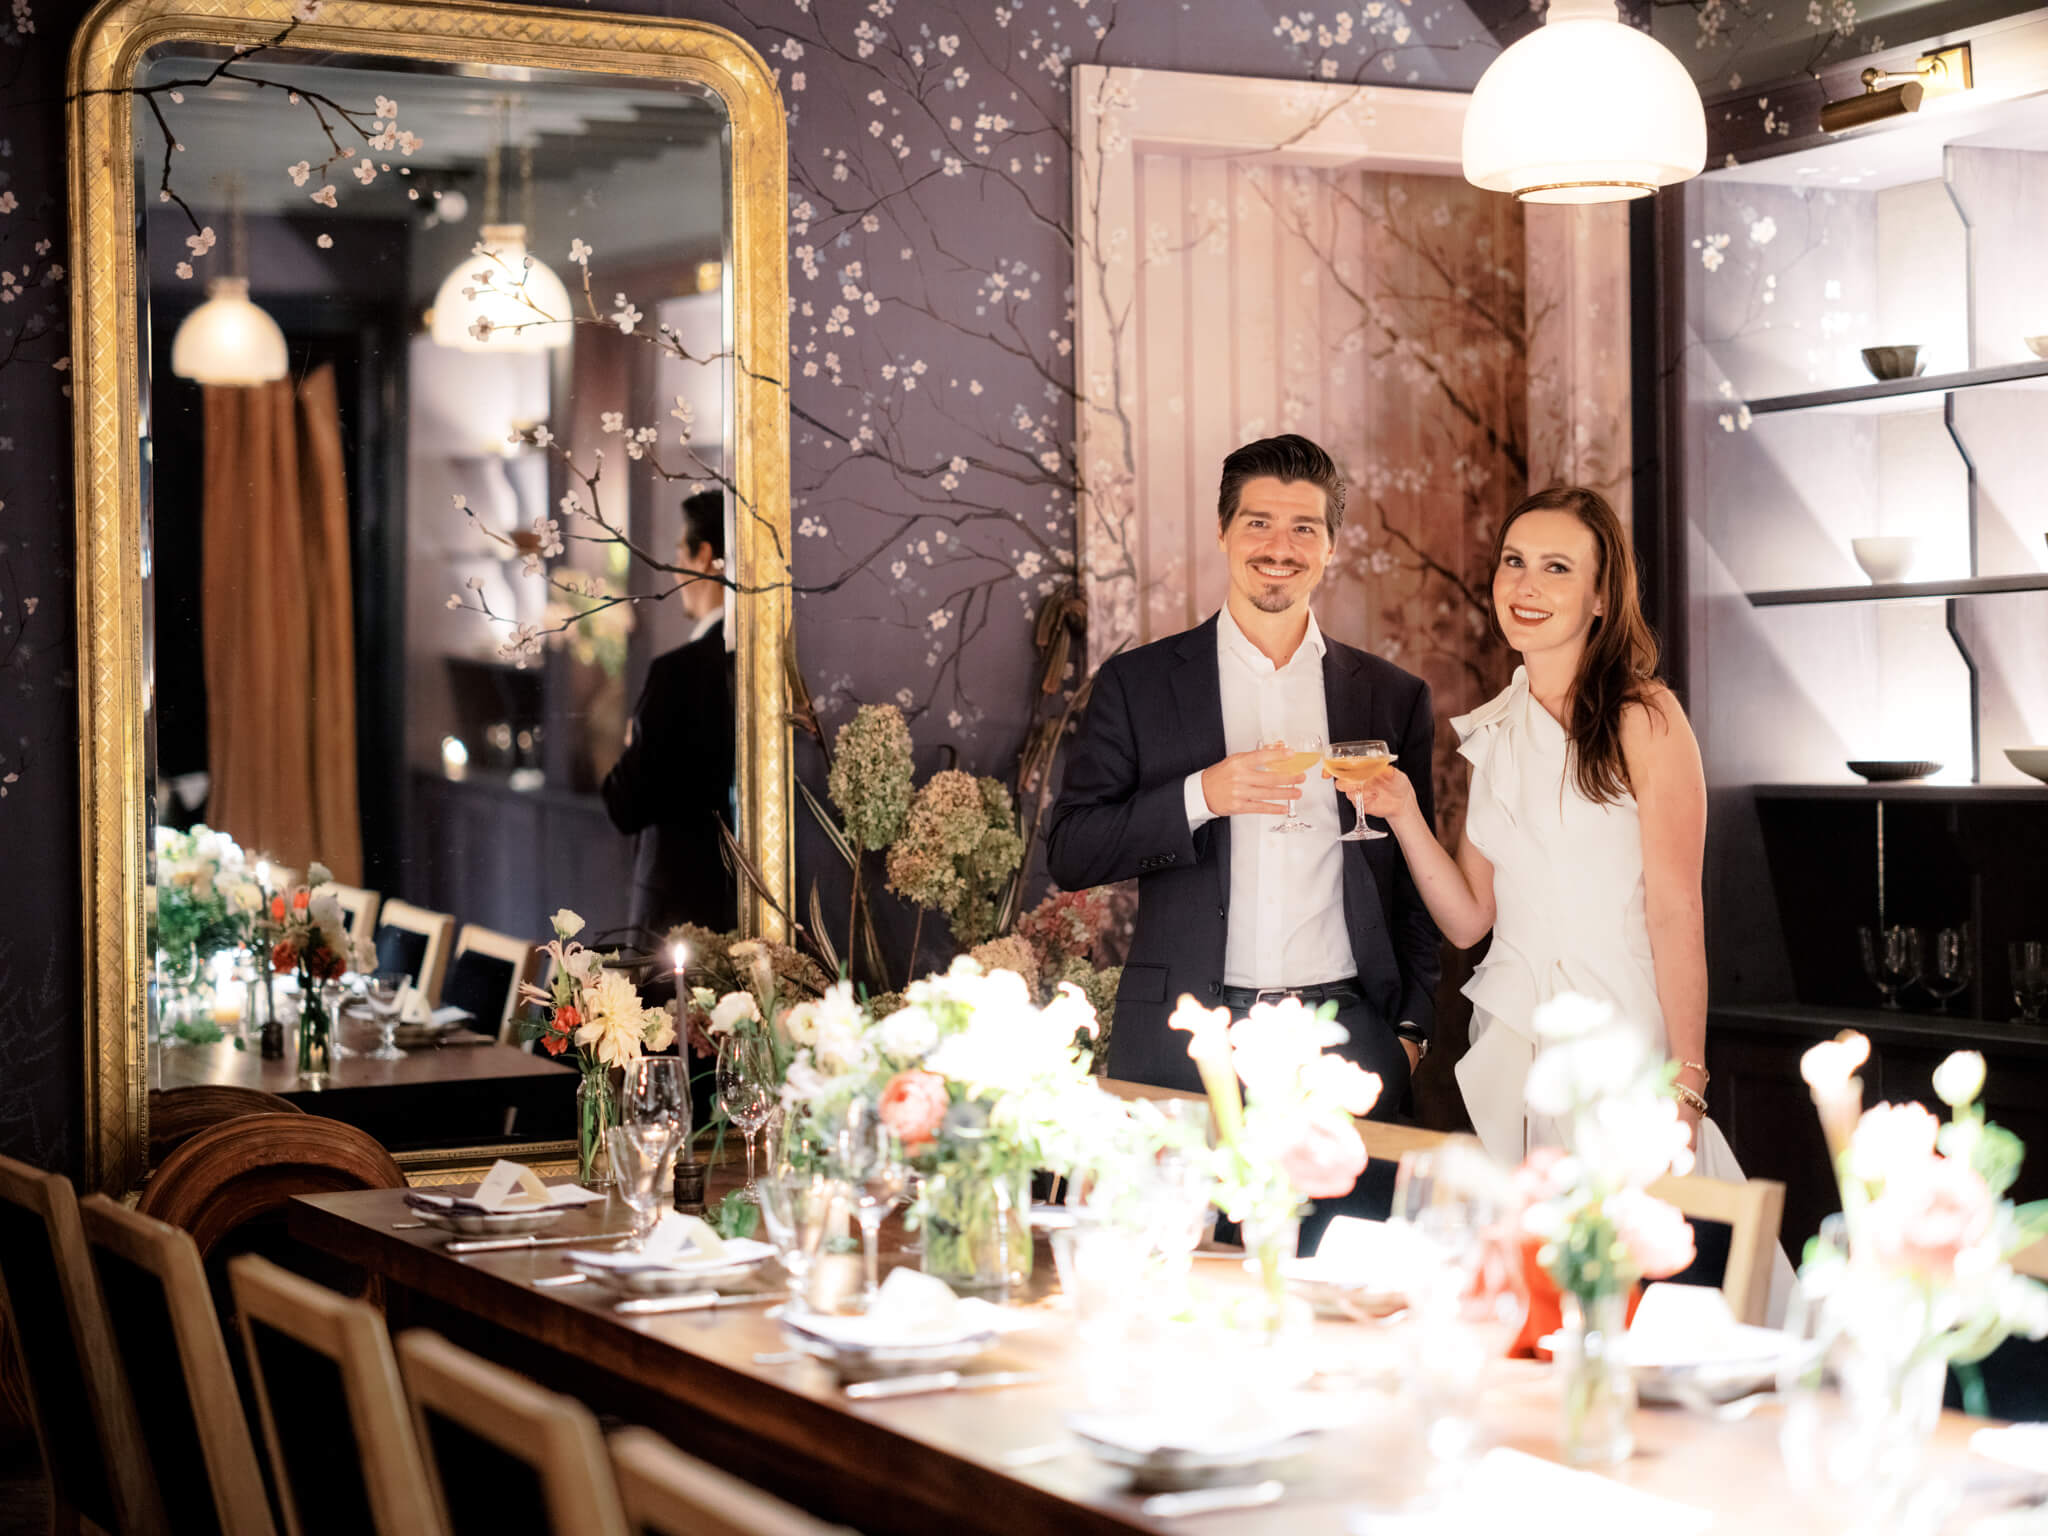 The bride and groom are holding champagne glasses inside a wedding reception room at La Mercerie Soho Hotel for their intimate wedding. Image by Jenny Fu Studio